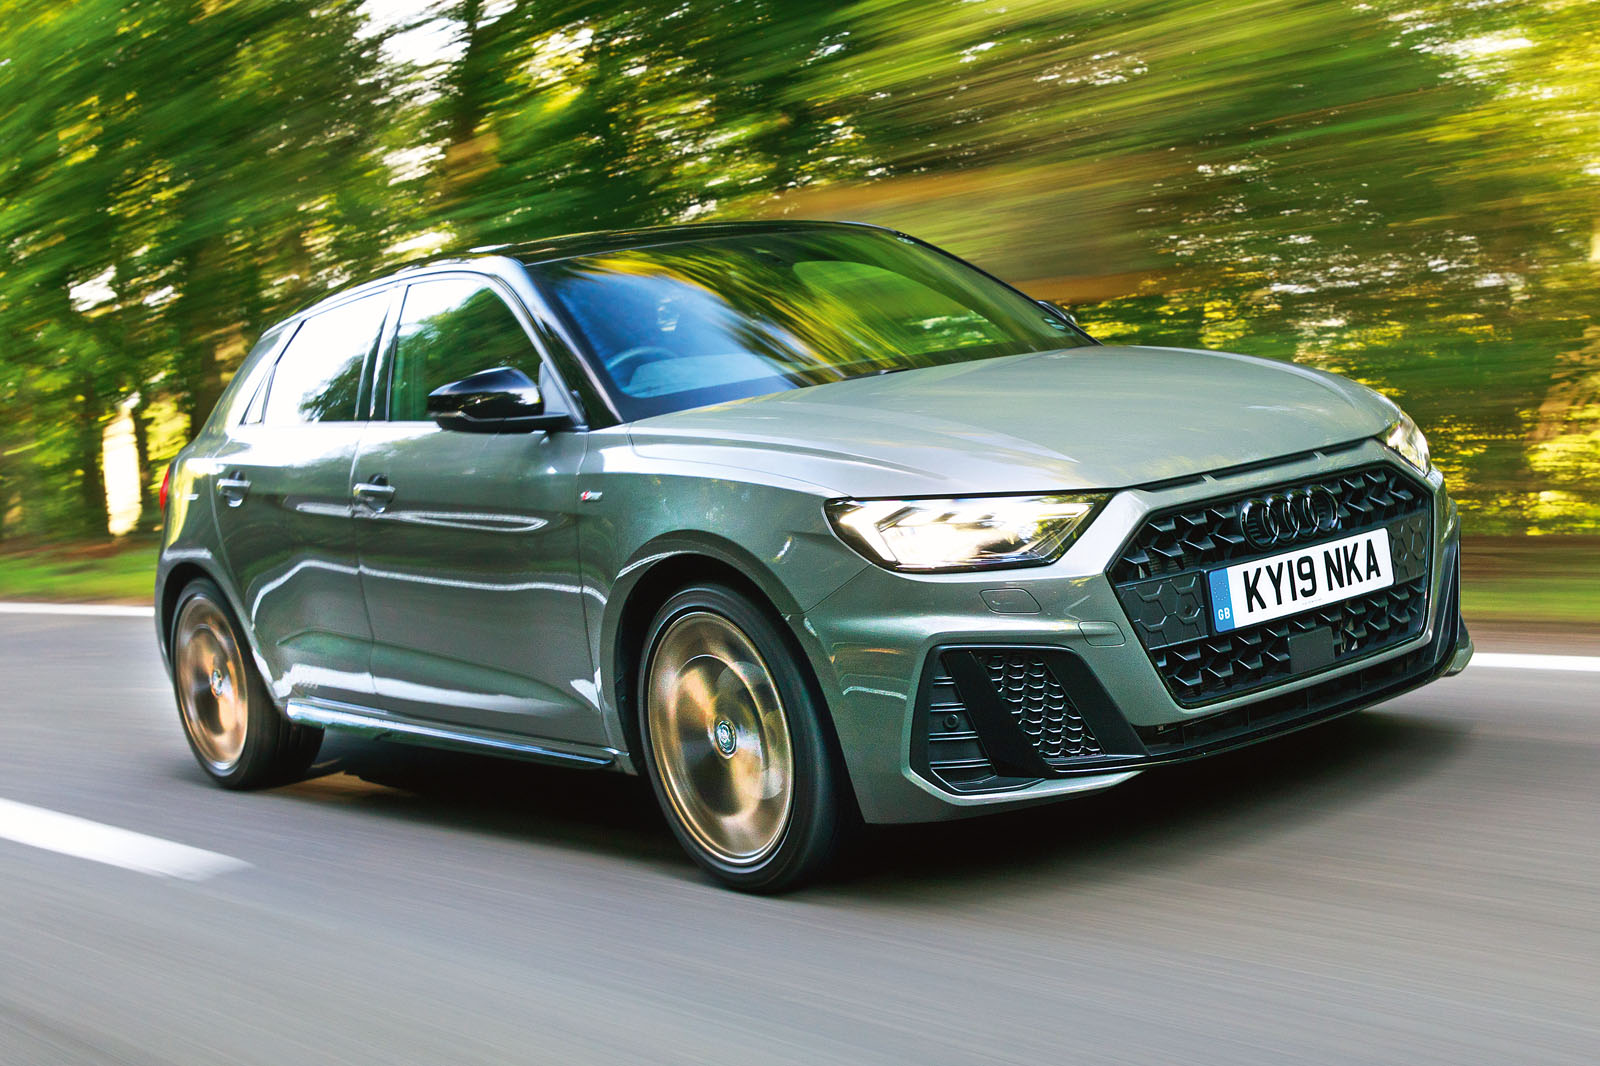 Used Audi A1 cars for Sale, Audi A1 Finance, Buy Online